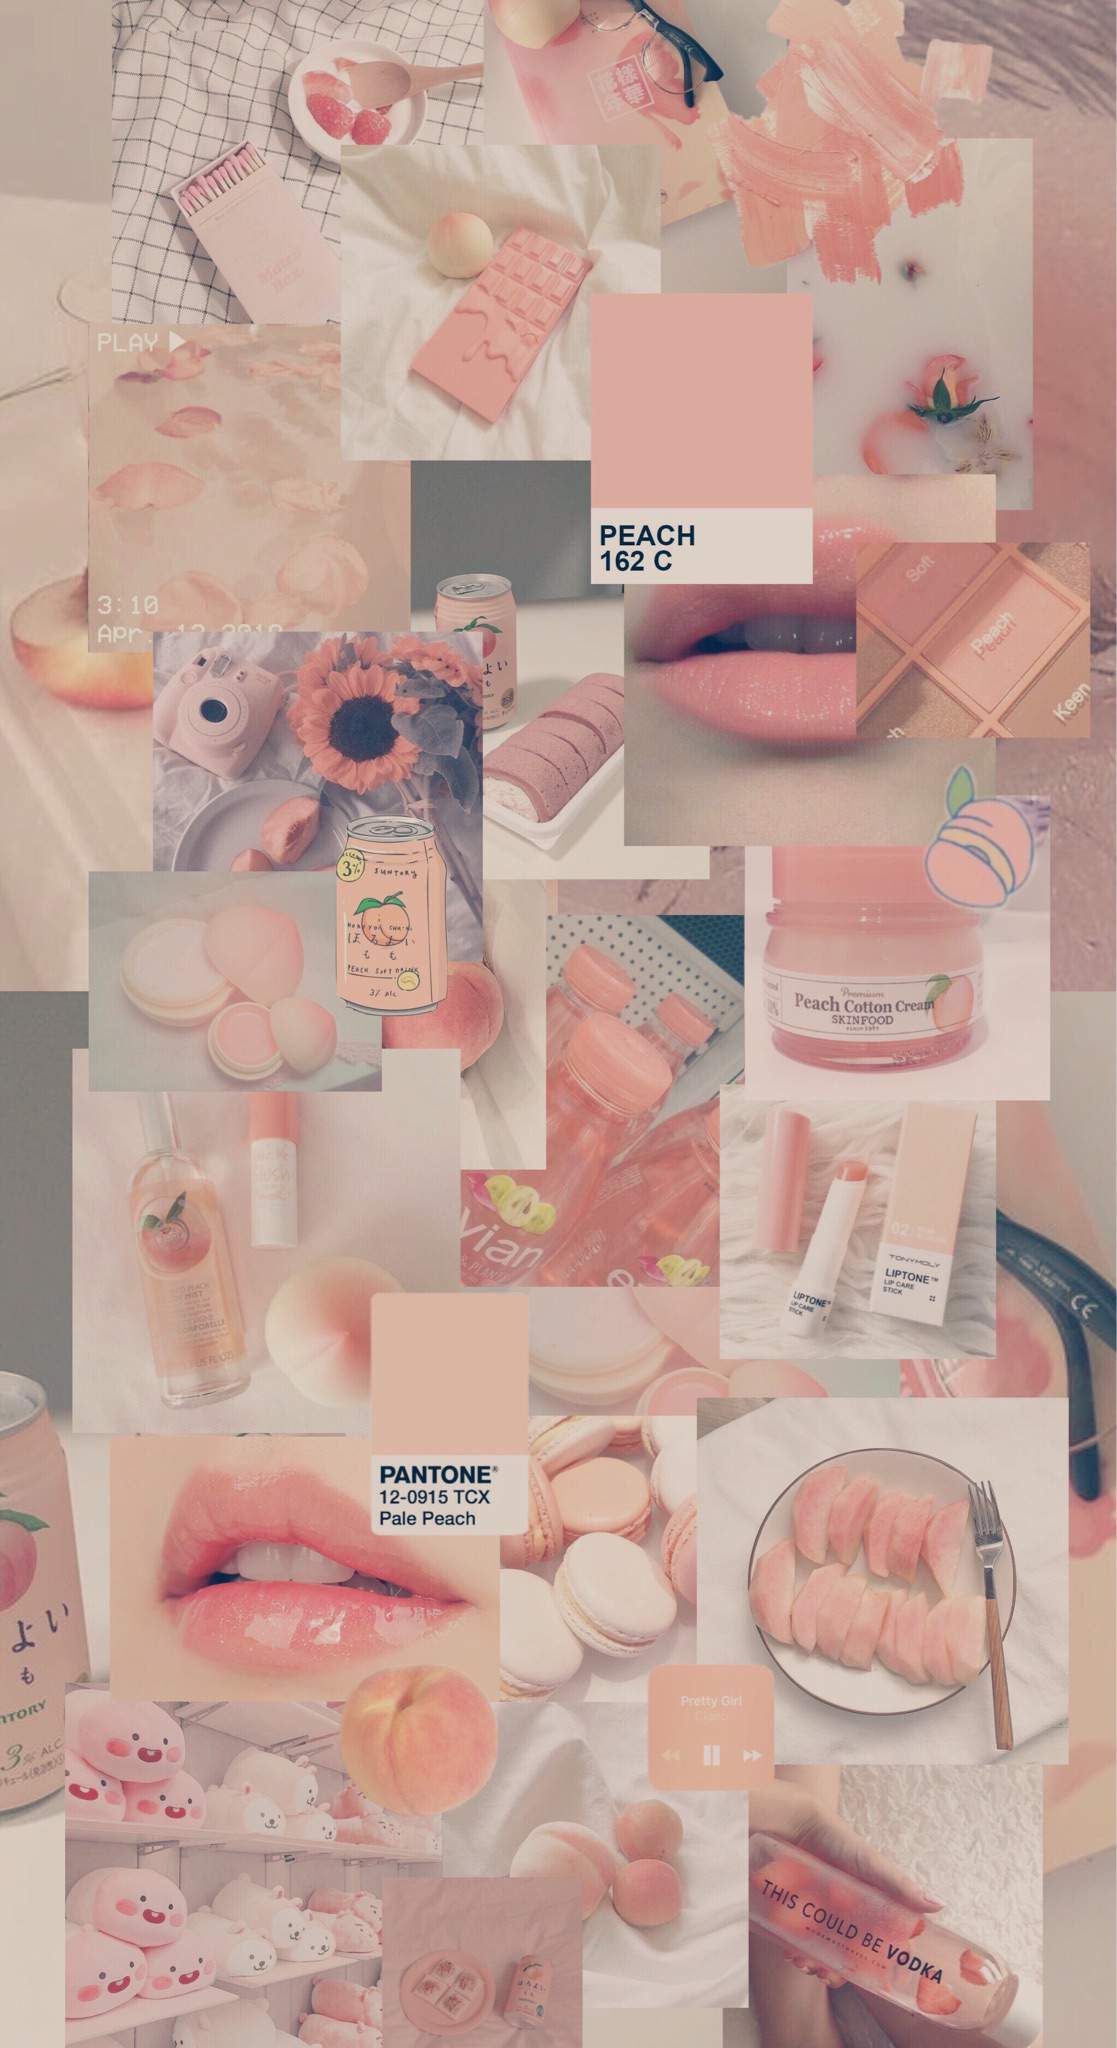 A collage of pictures with pink and white items - Peach, makeup